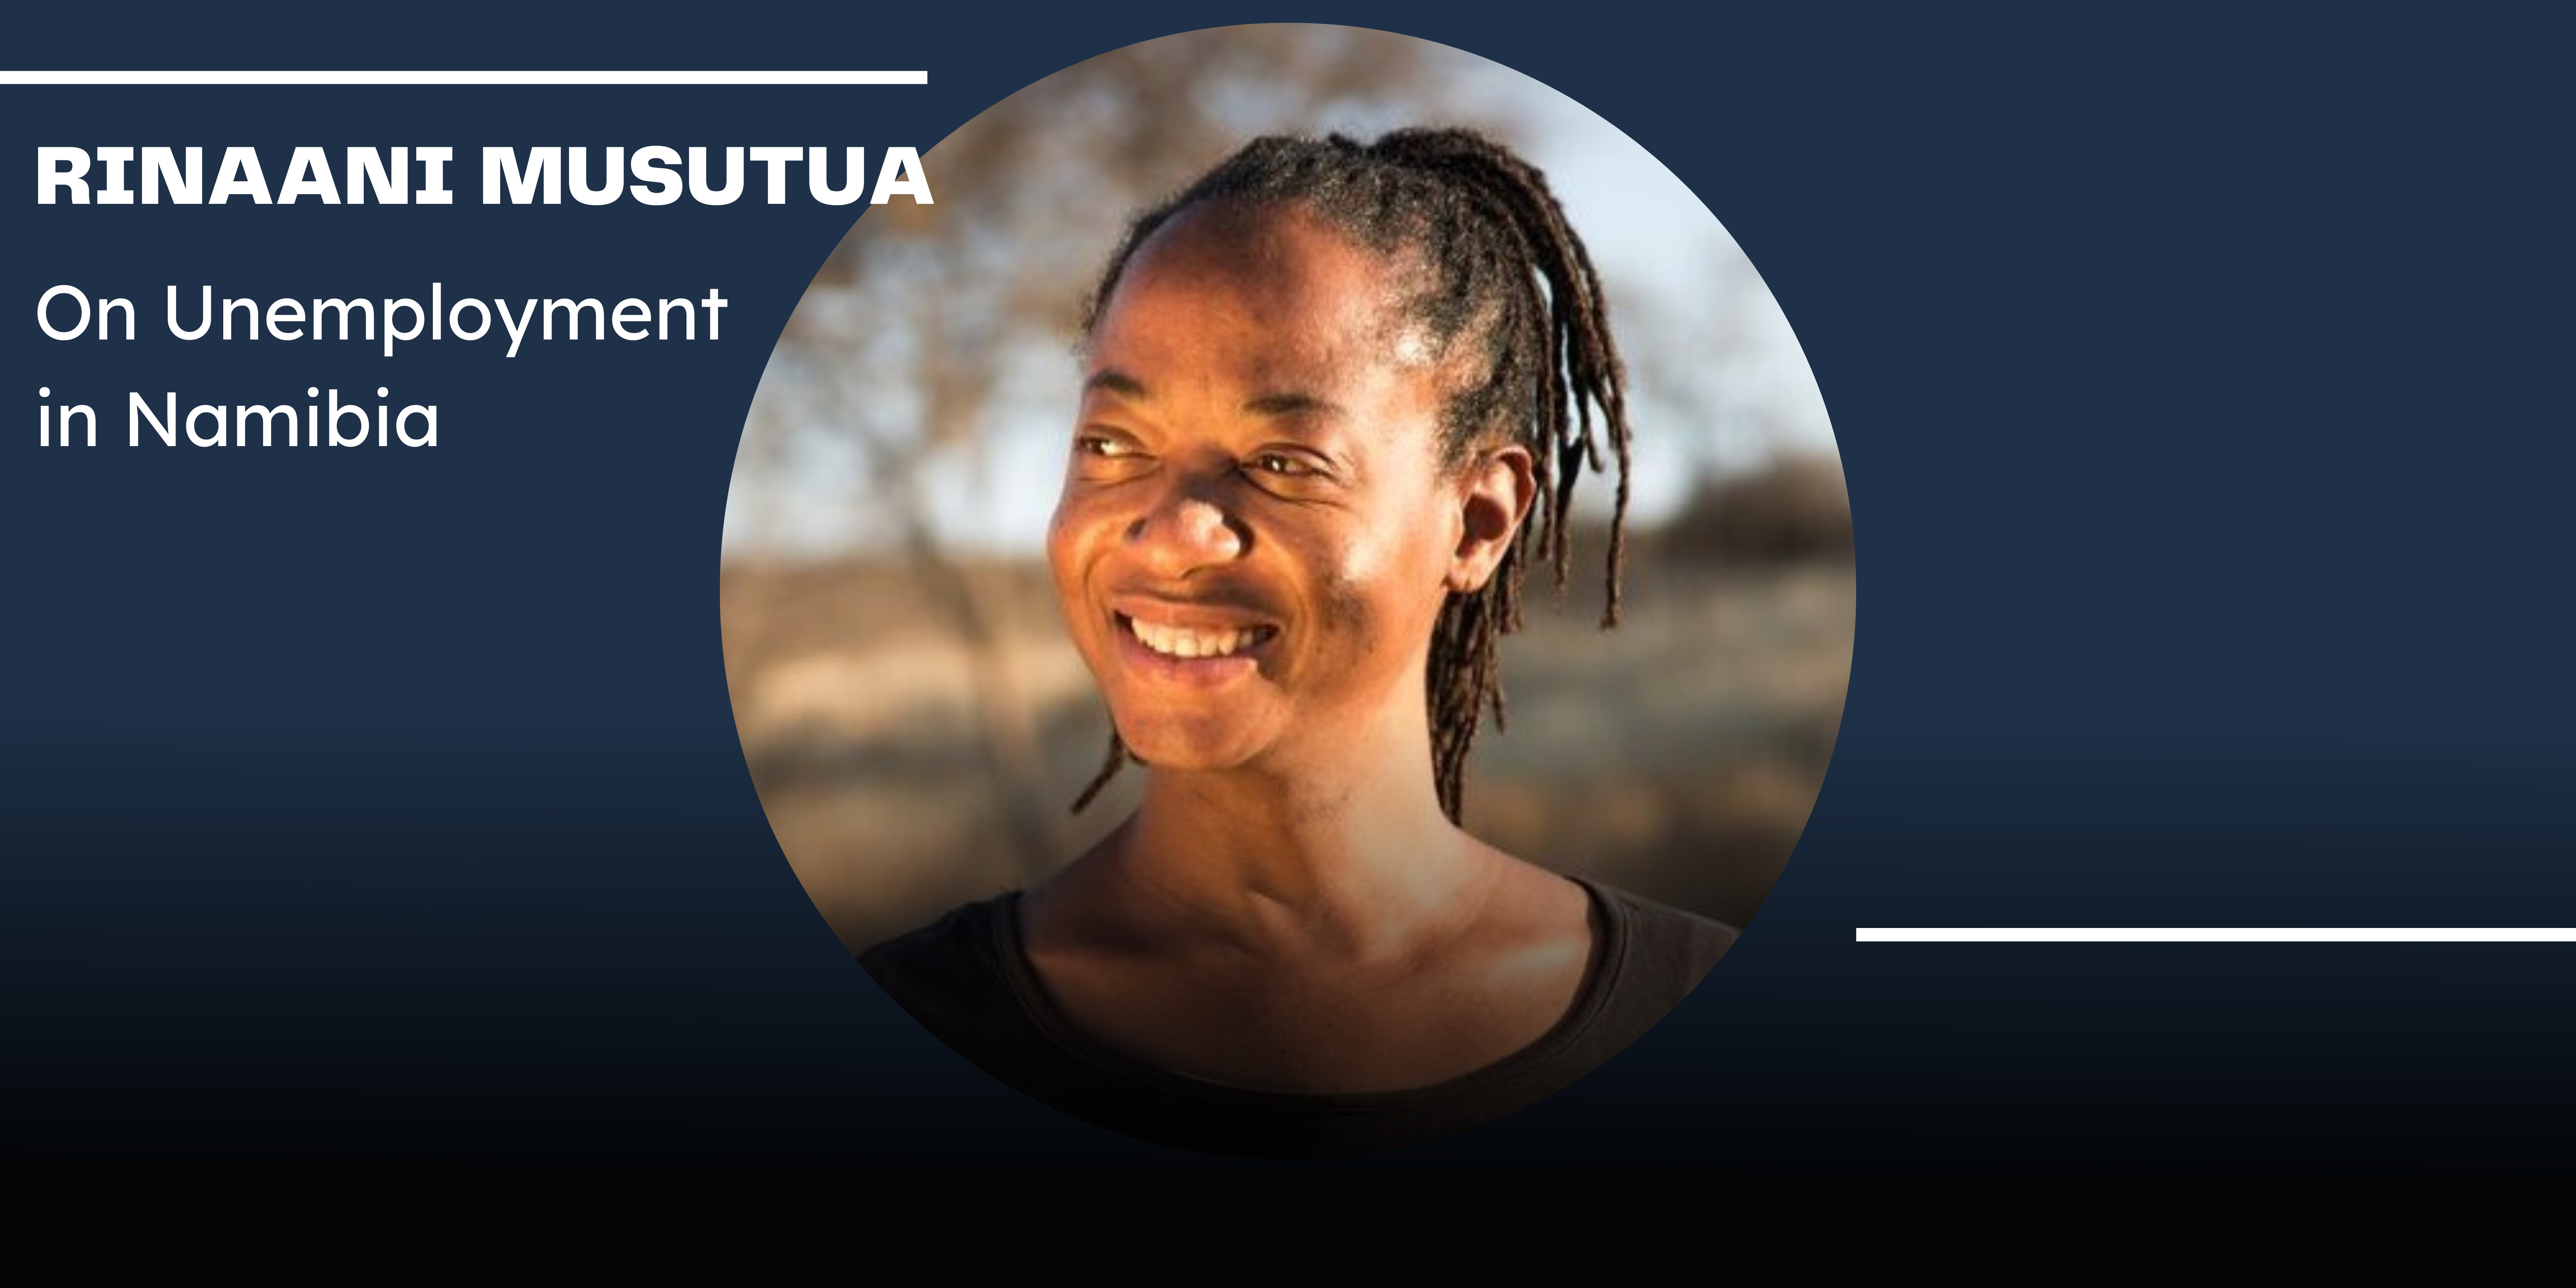 Rinaani Musutua, an advocate for economic and social justice with the Basic Income Grant Coalition, provides her perspective on Namibia’s unemployment rate.